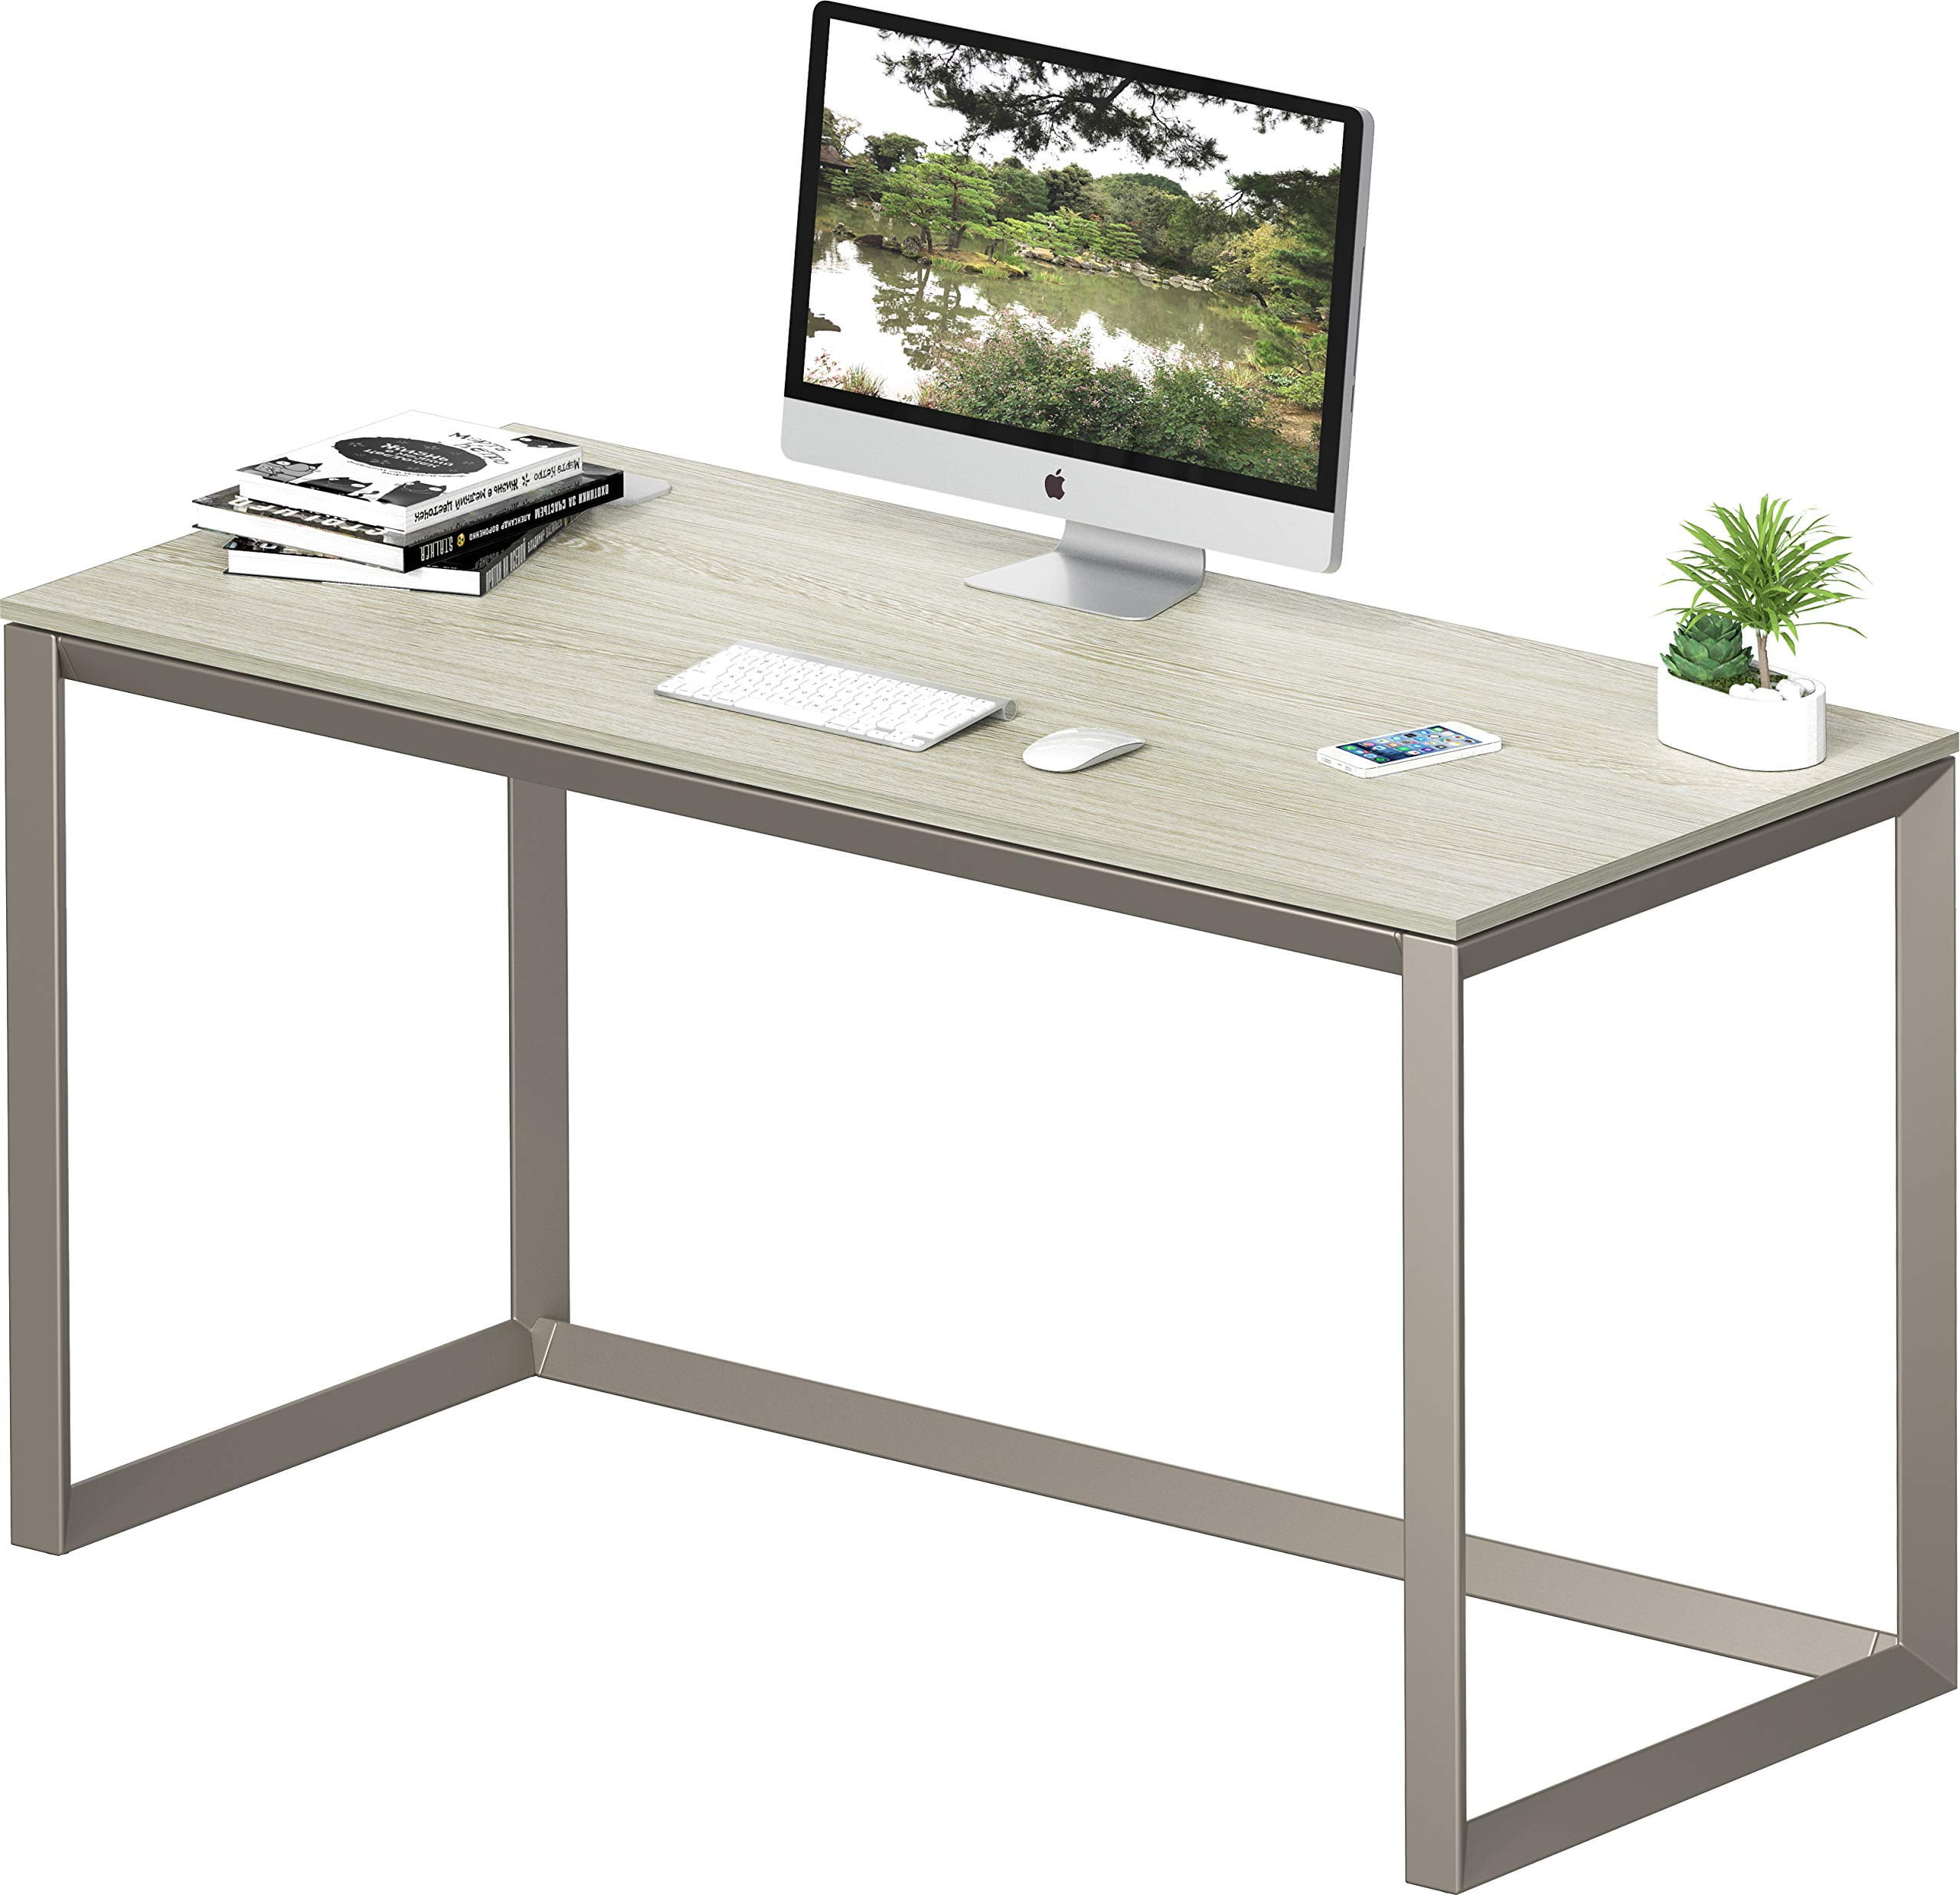 T Shaped Desk for Two with Storage 108 x 72 x 30 - Elements by Harmony  Collection